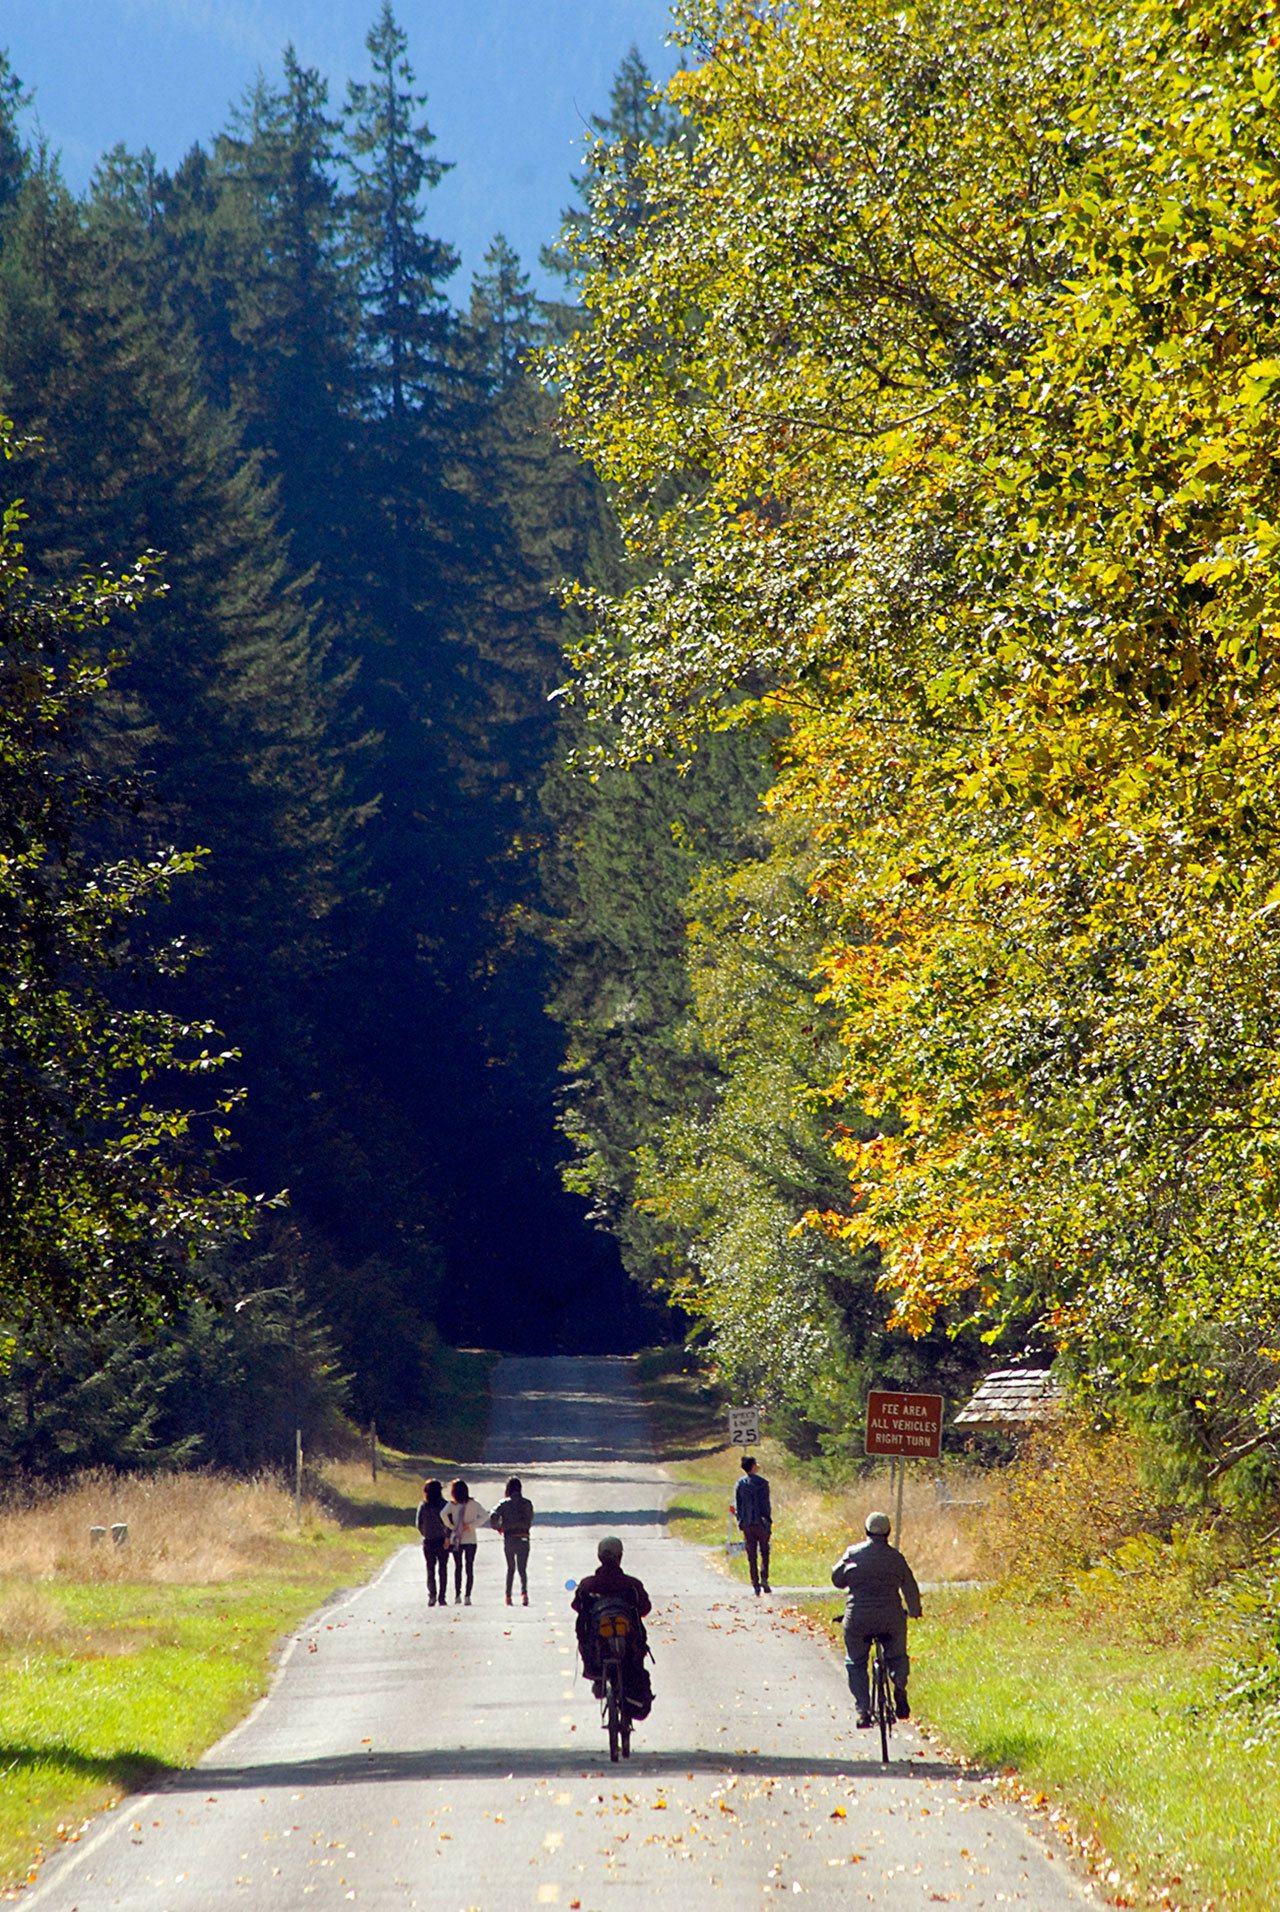 Hikers and bicyclists make their way up Olympic Hot Springs Road in the Elwha Valley of Olympic National Park last month. (Keith Thorpe/Peninsula Daily News)